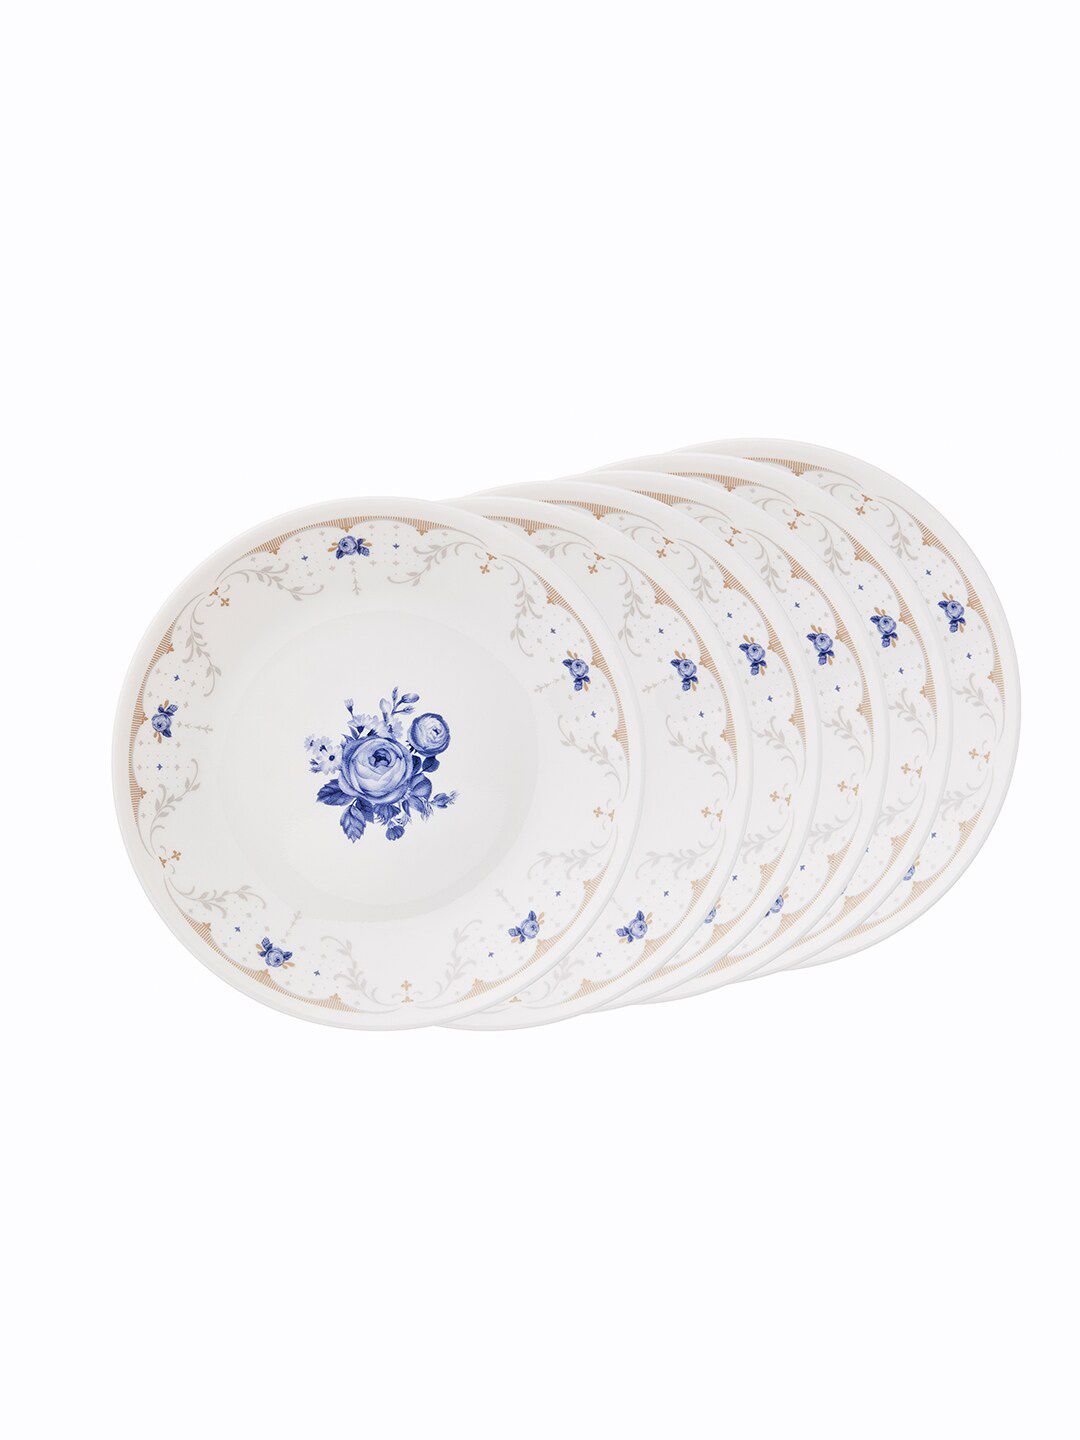 Corelle White & Blue Set Of 6 Floral Printed Glossy Plates Price in India